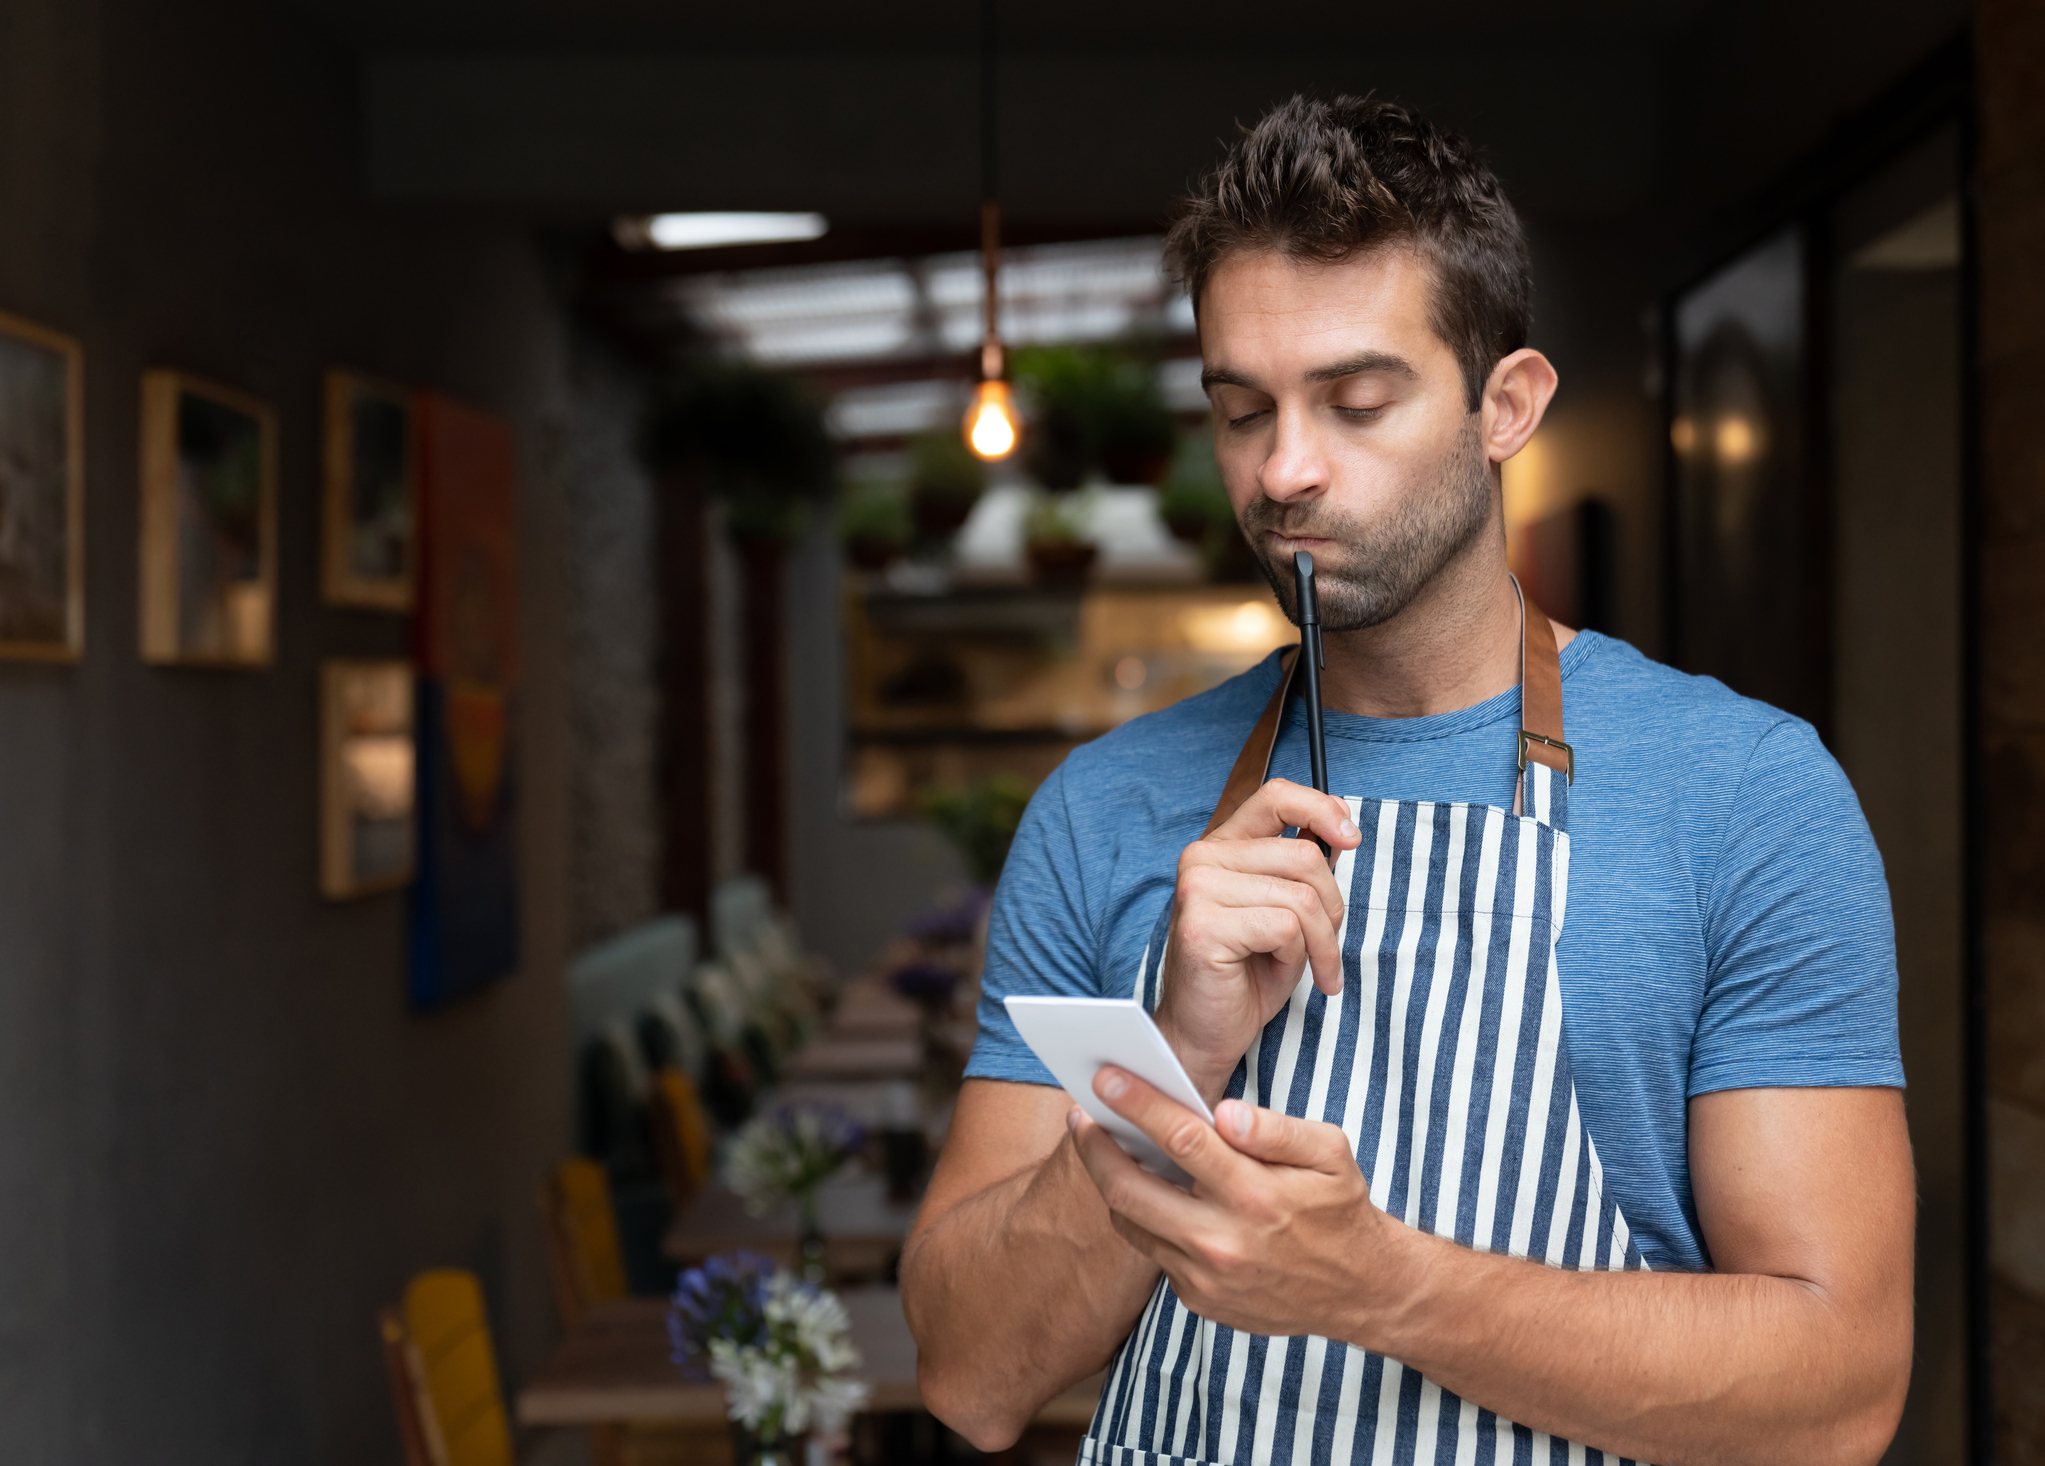 A man wearing a blue shirt and striped apron stands in a restaurant, holding a pen near his mouth and looking at a notepad